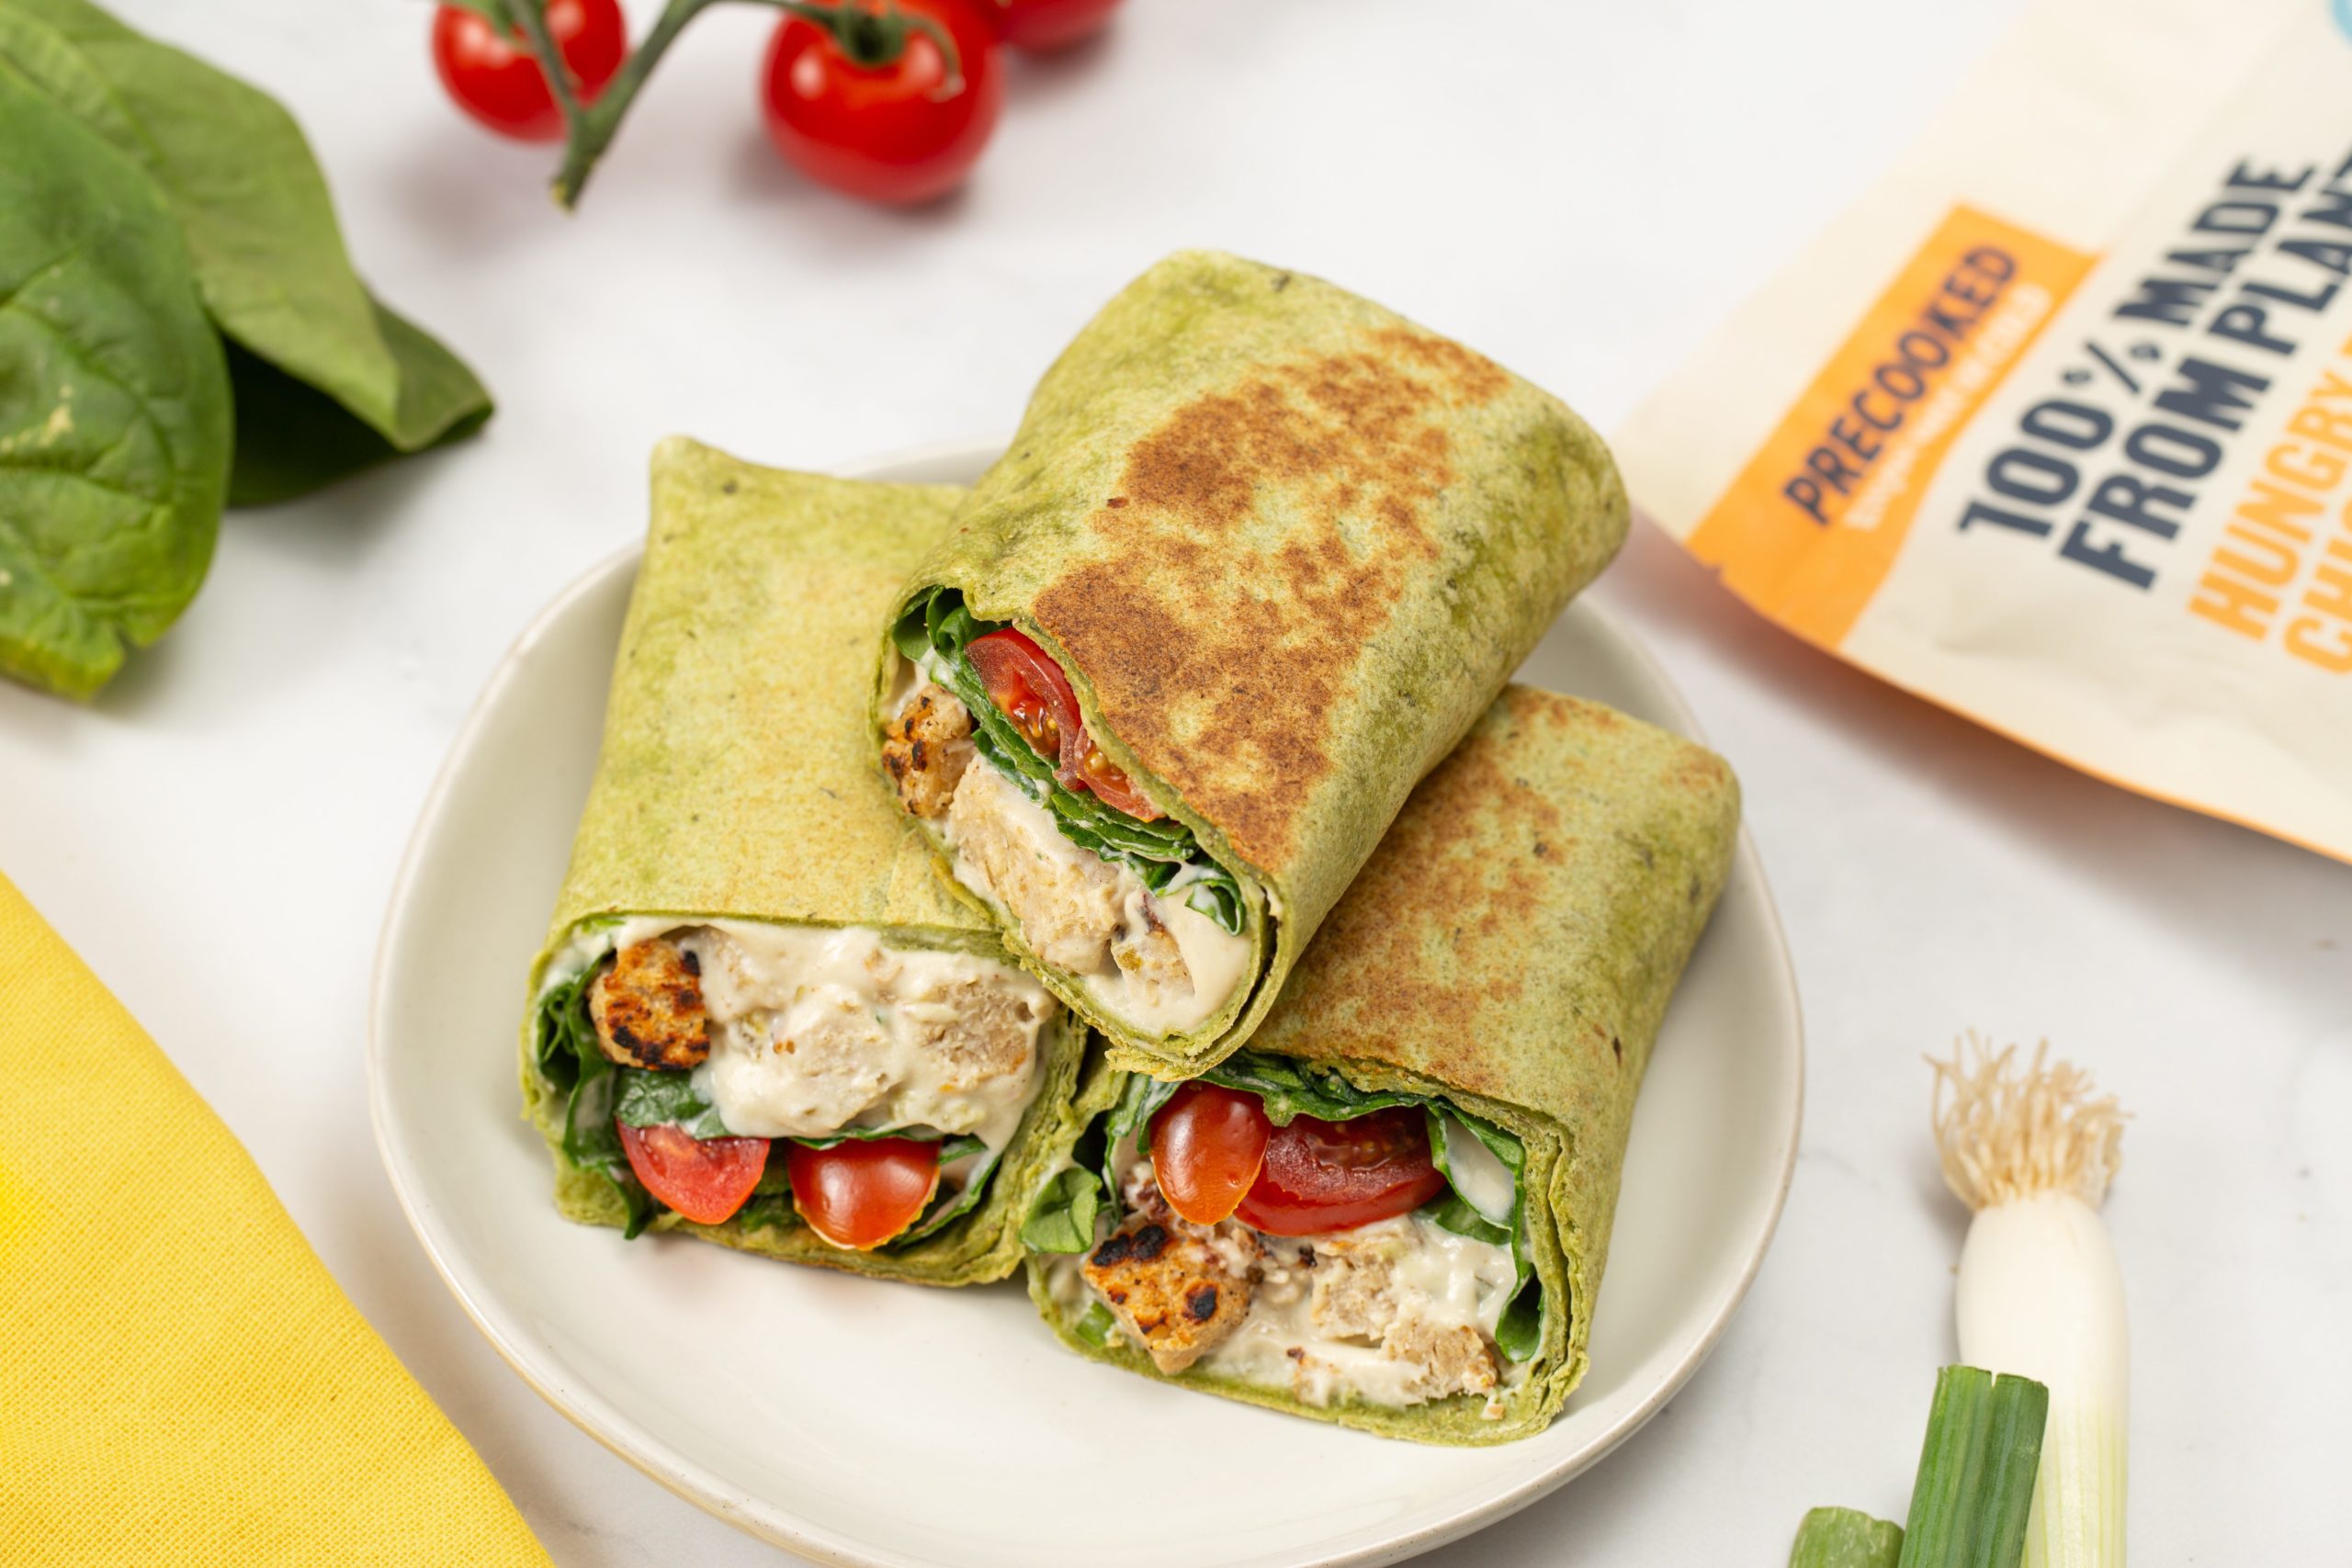 Grilled Chicken and Spinach Wrap